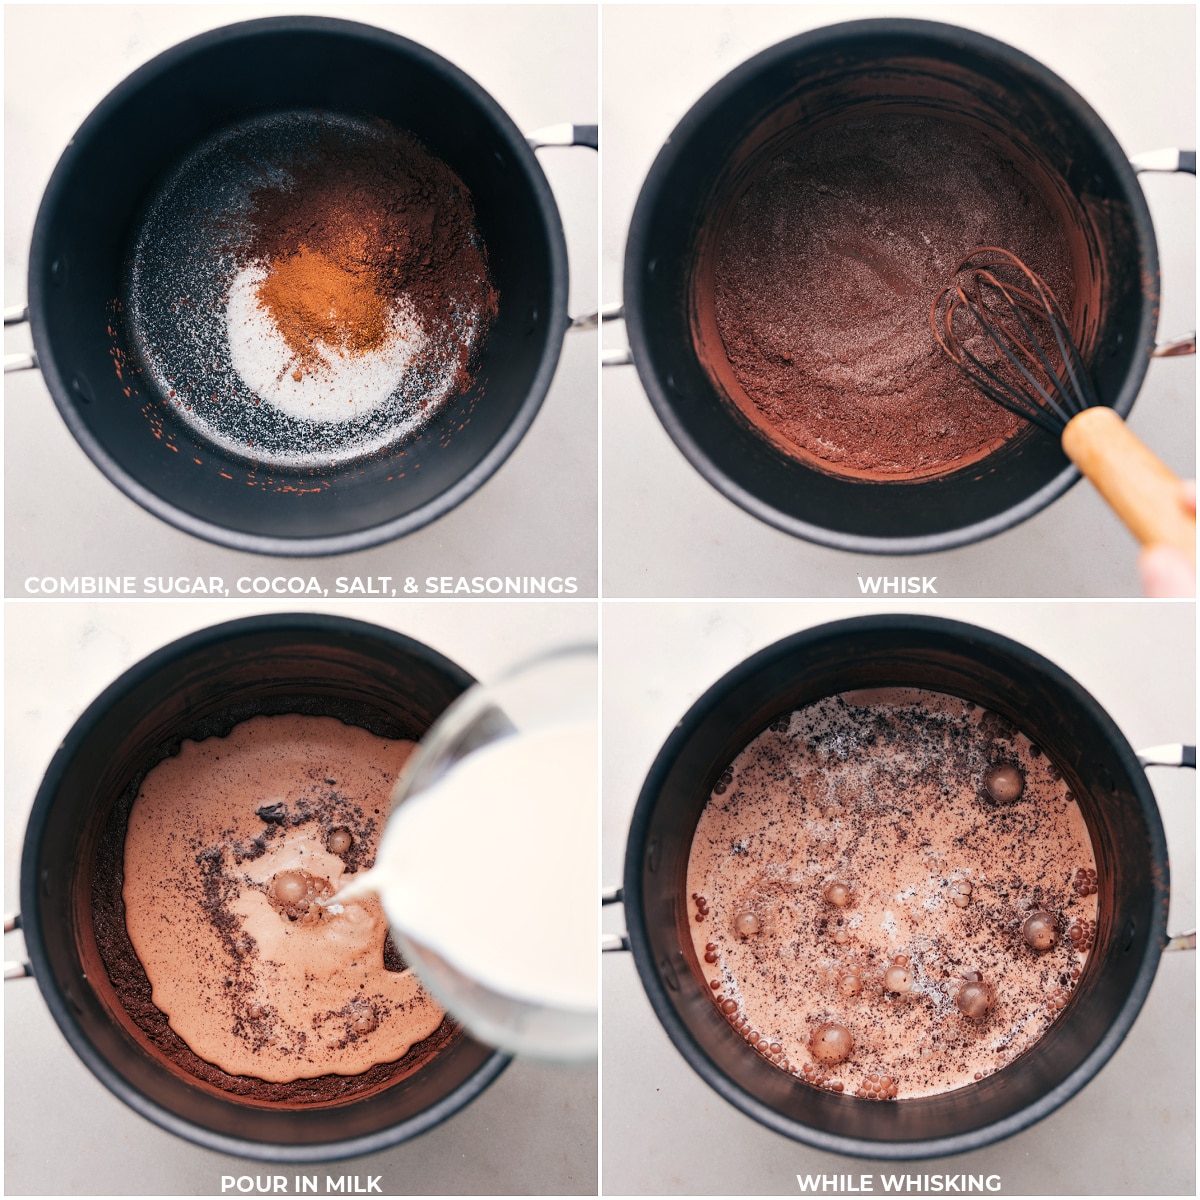 Sugar, cocoa, and seasonings combined and whisked, with milk introduced for slow heating.